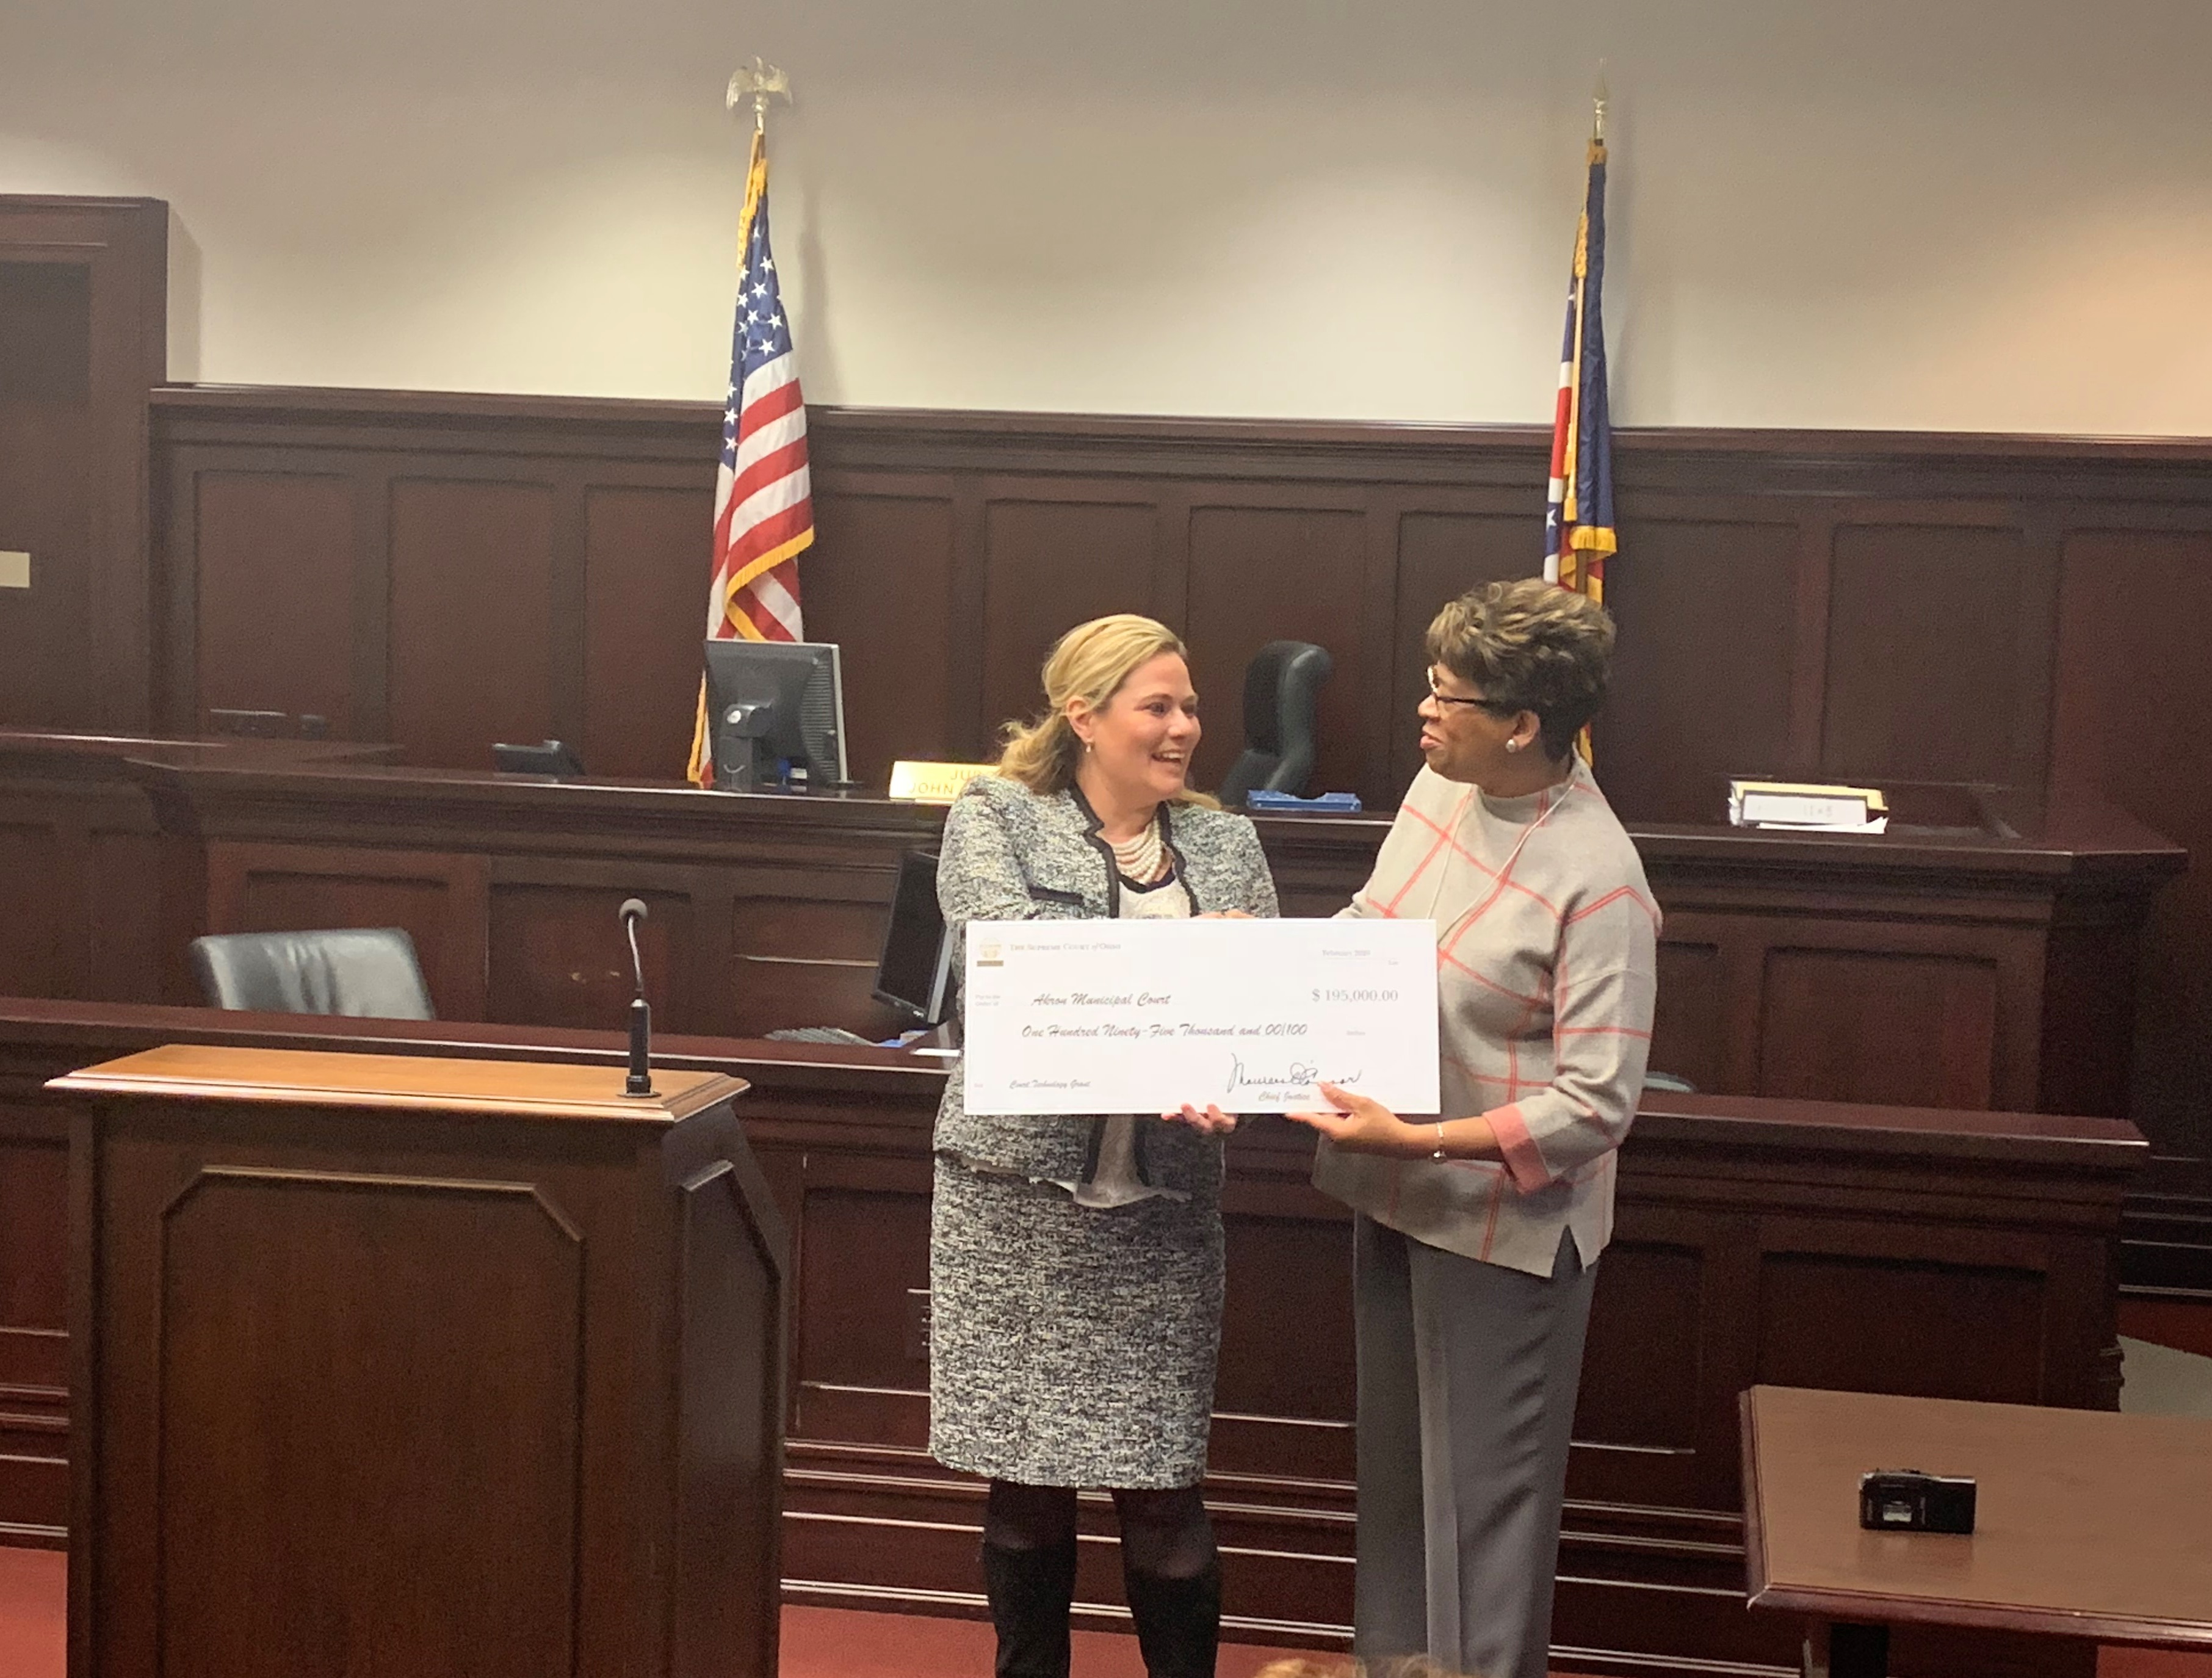 Ohio Supreme Court Justice Melody Stewart presents a Technology Grant check to Akron Municipal Court Administrative/Presiding Judge Nicole Walker